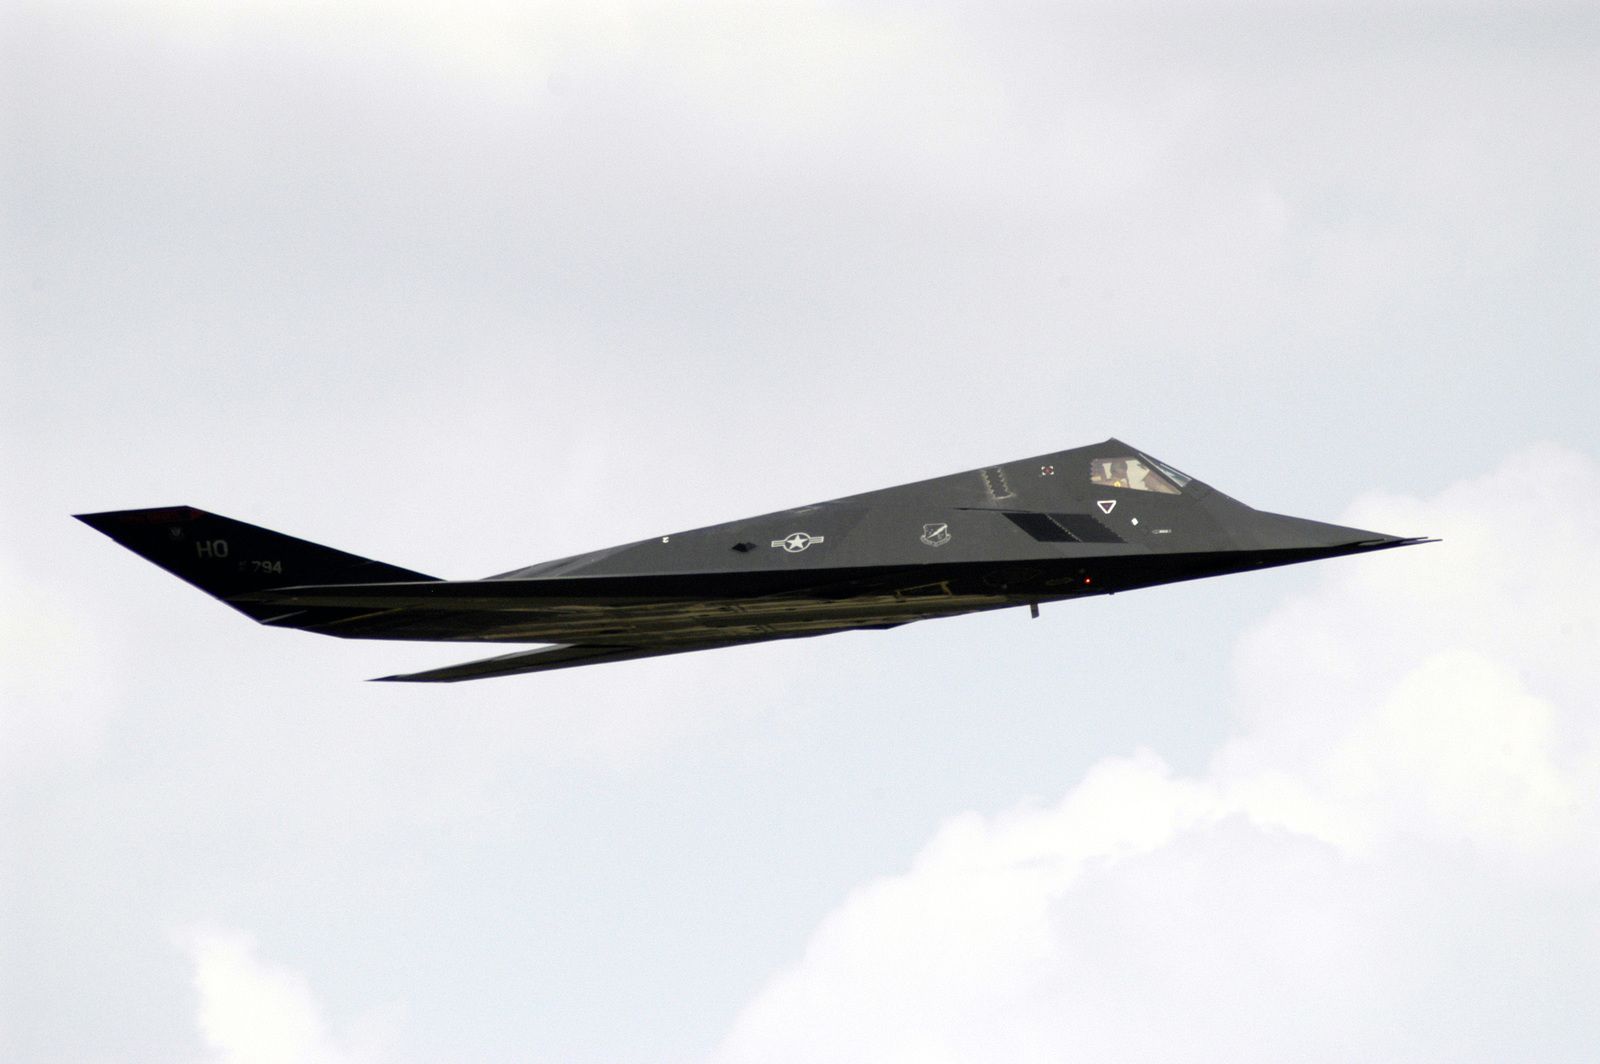 an-us-air-force-usaf-f-117a-nighthawk-stealth-fighter-aircraft-assigned-to-211dd0-1600